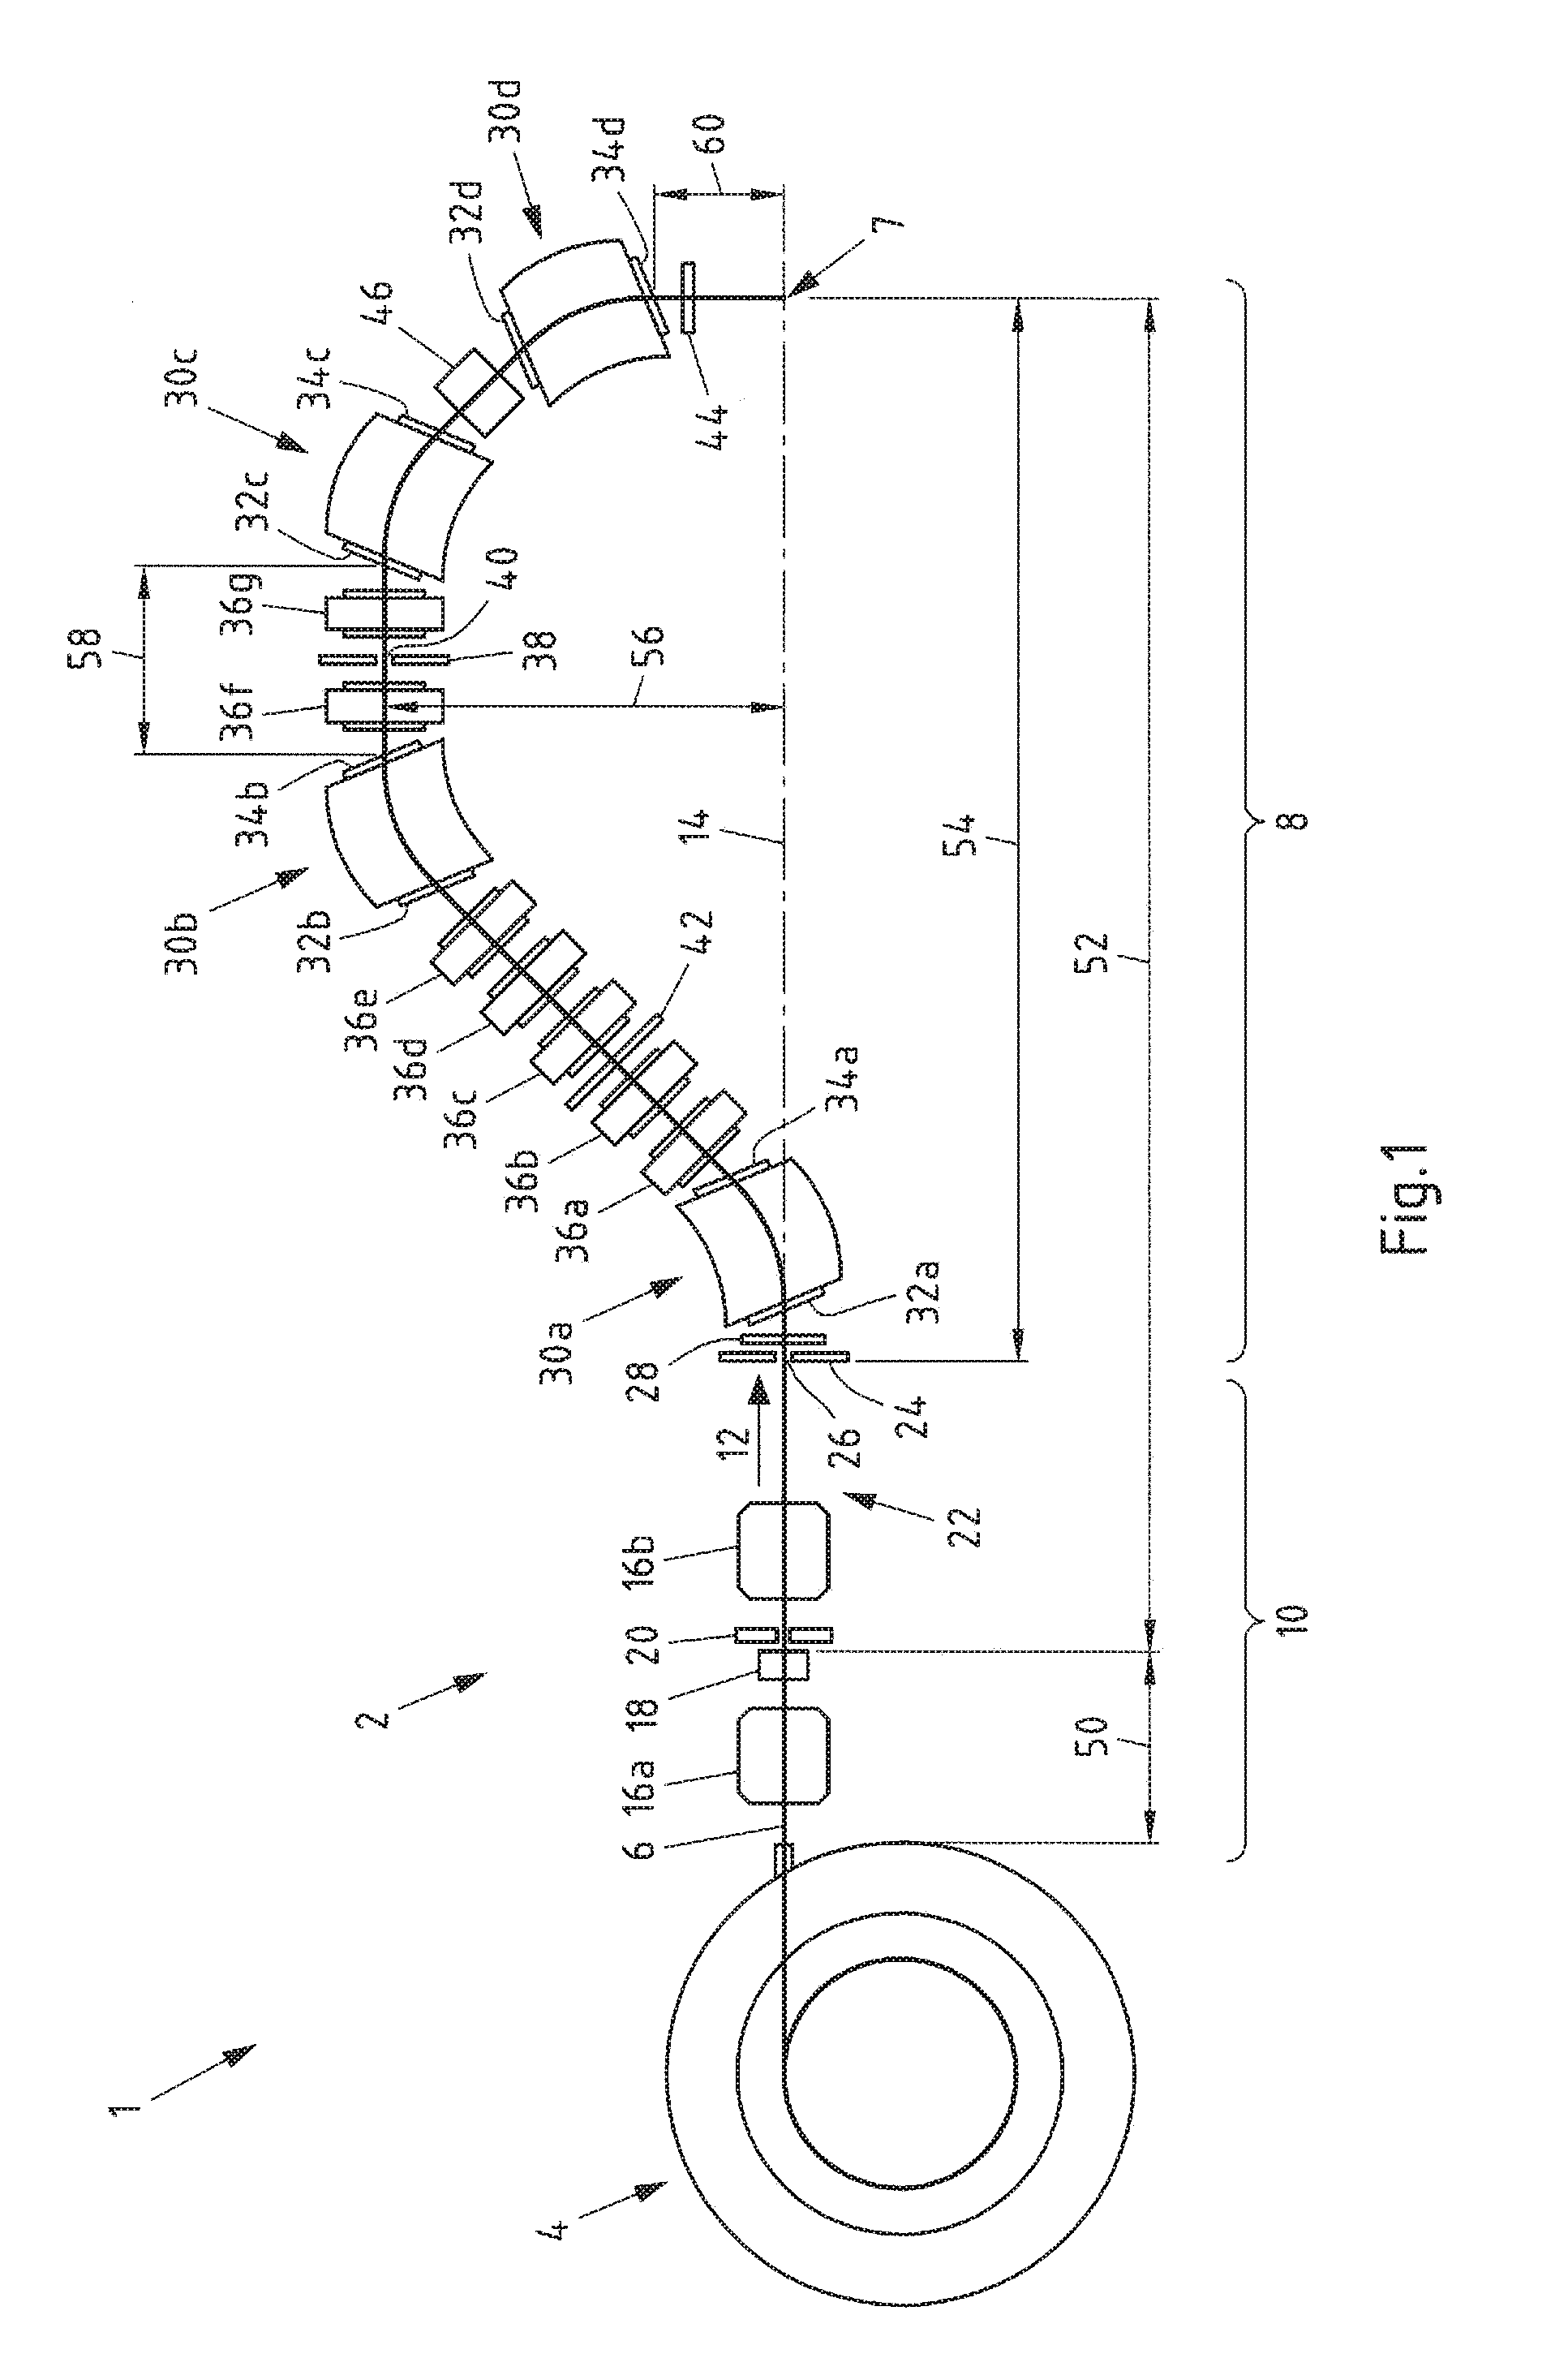 Particle beam treatment system with solenoid magnets